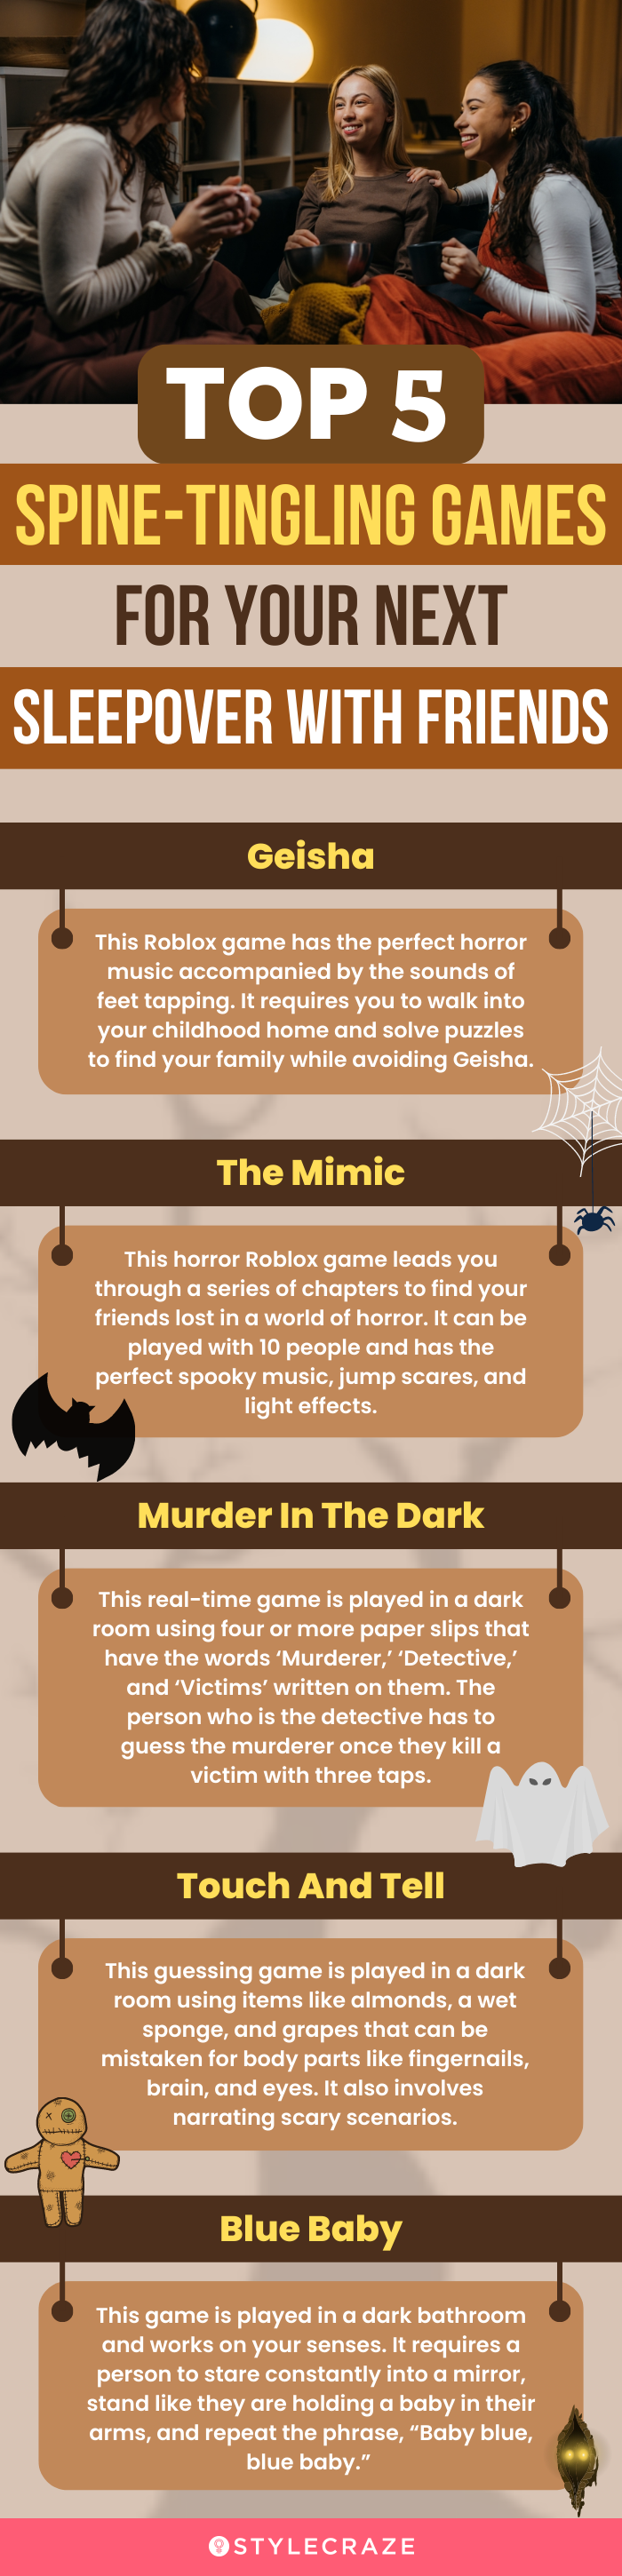 top 5 spine tingling games for your next sleepover with friends (infographic)